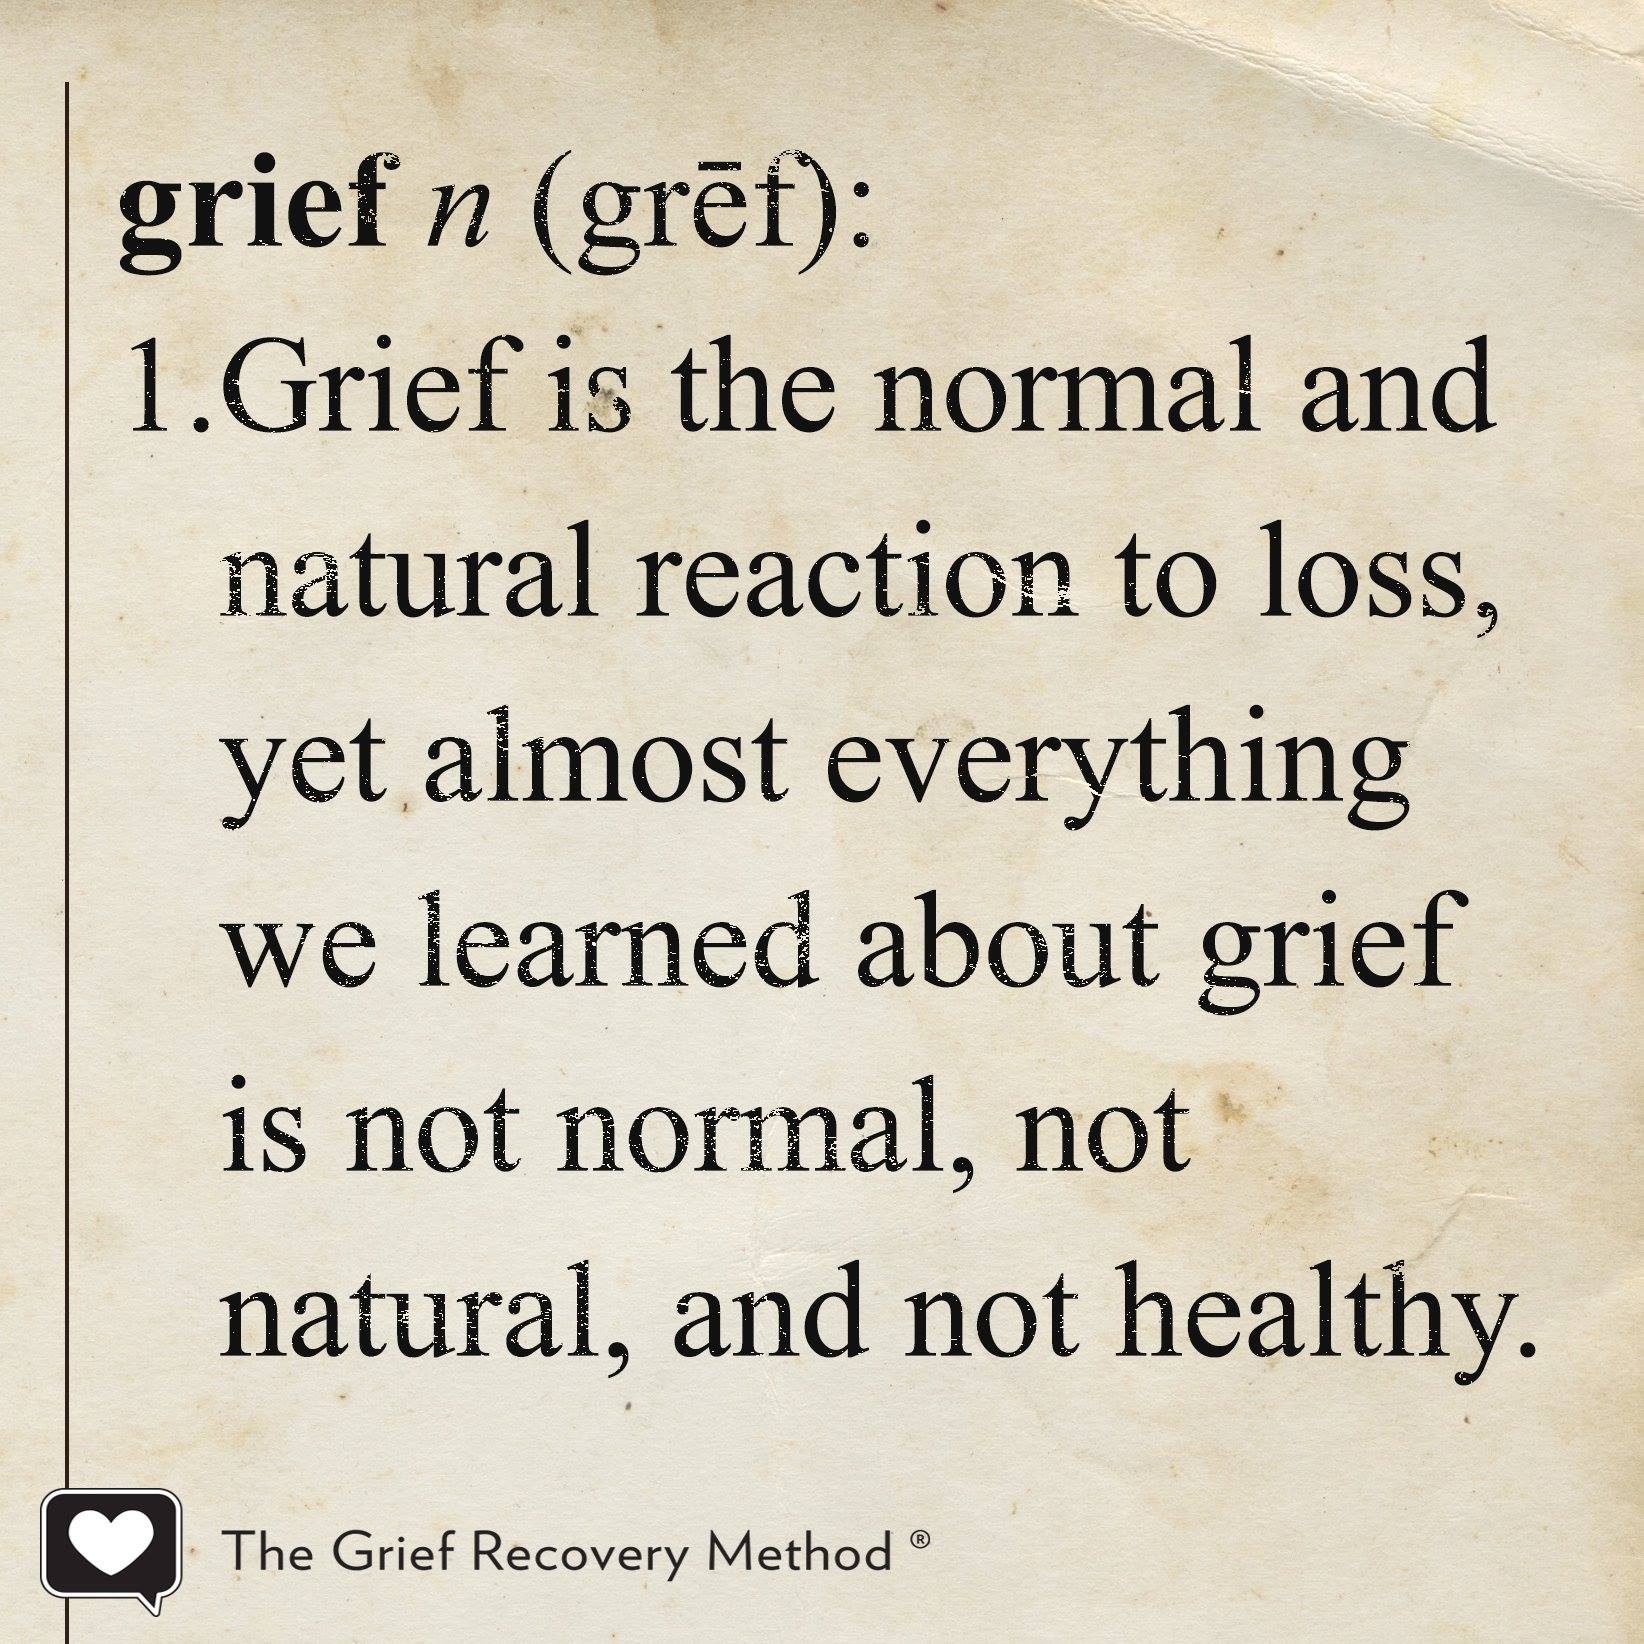 definition of grief normal and natural reaction to loss.jpg